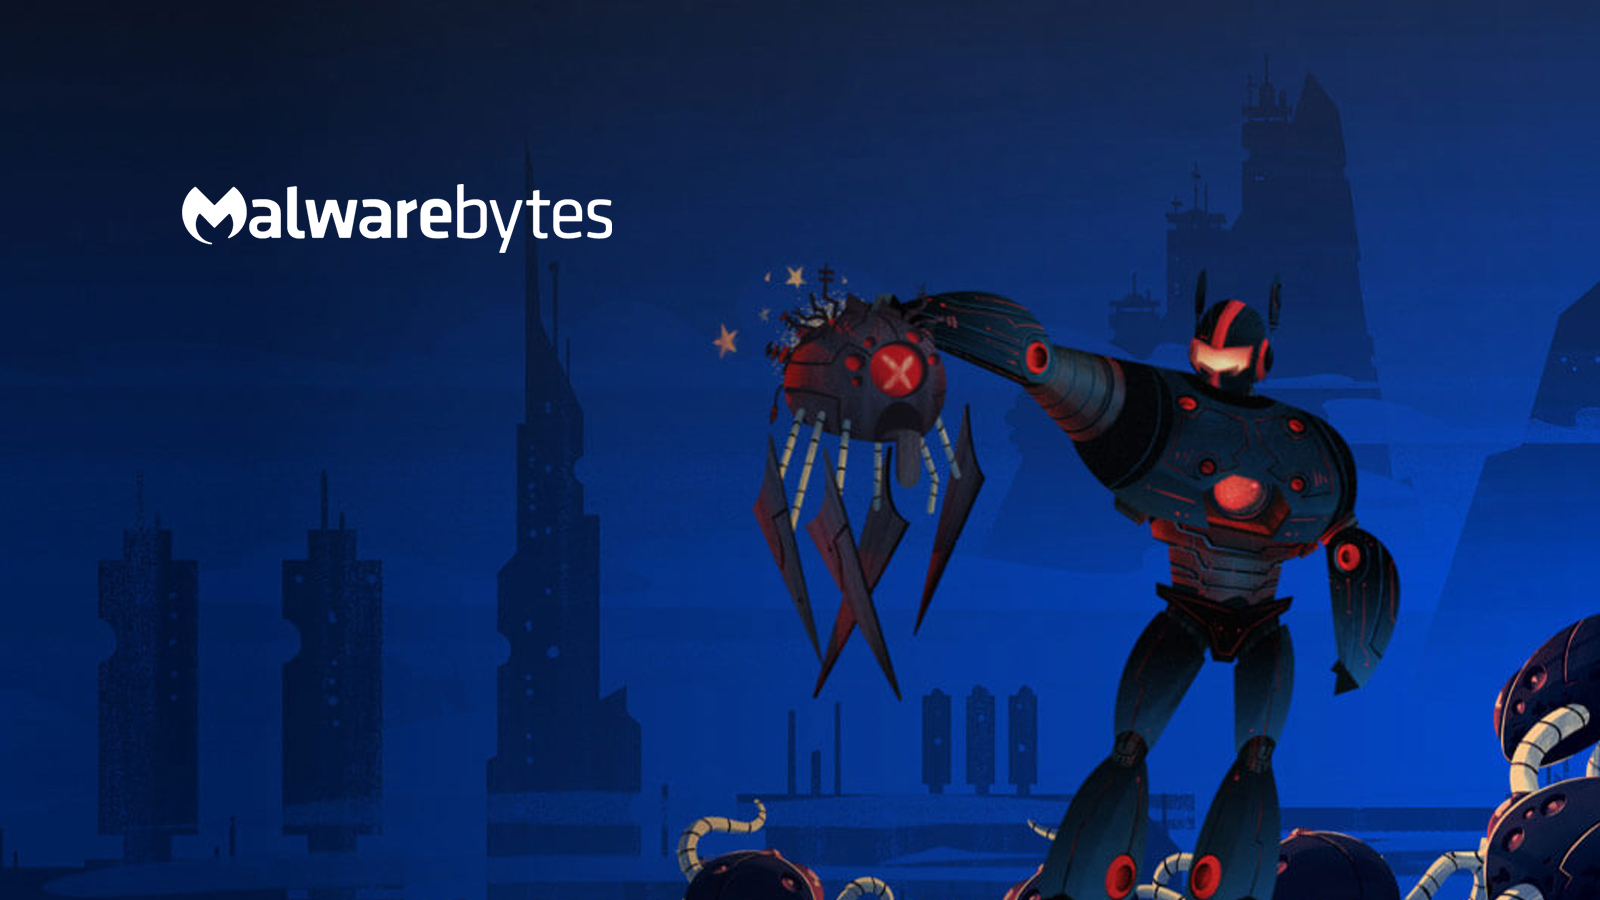 Malwarebytes Introduces Easy To Use Endpoint Protection